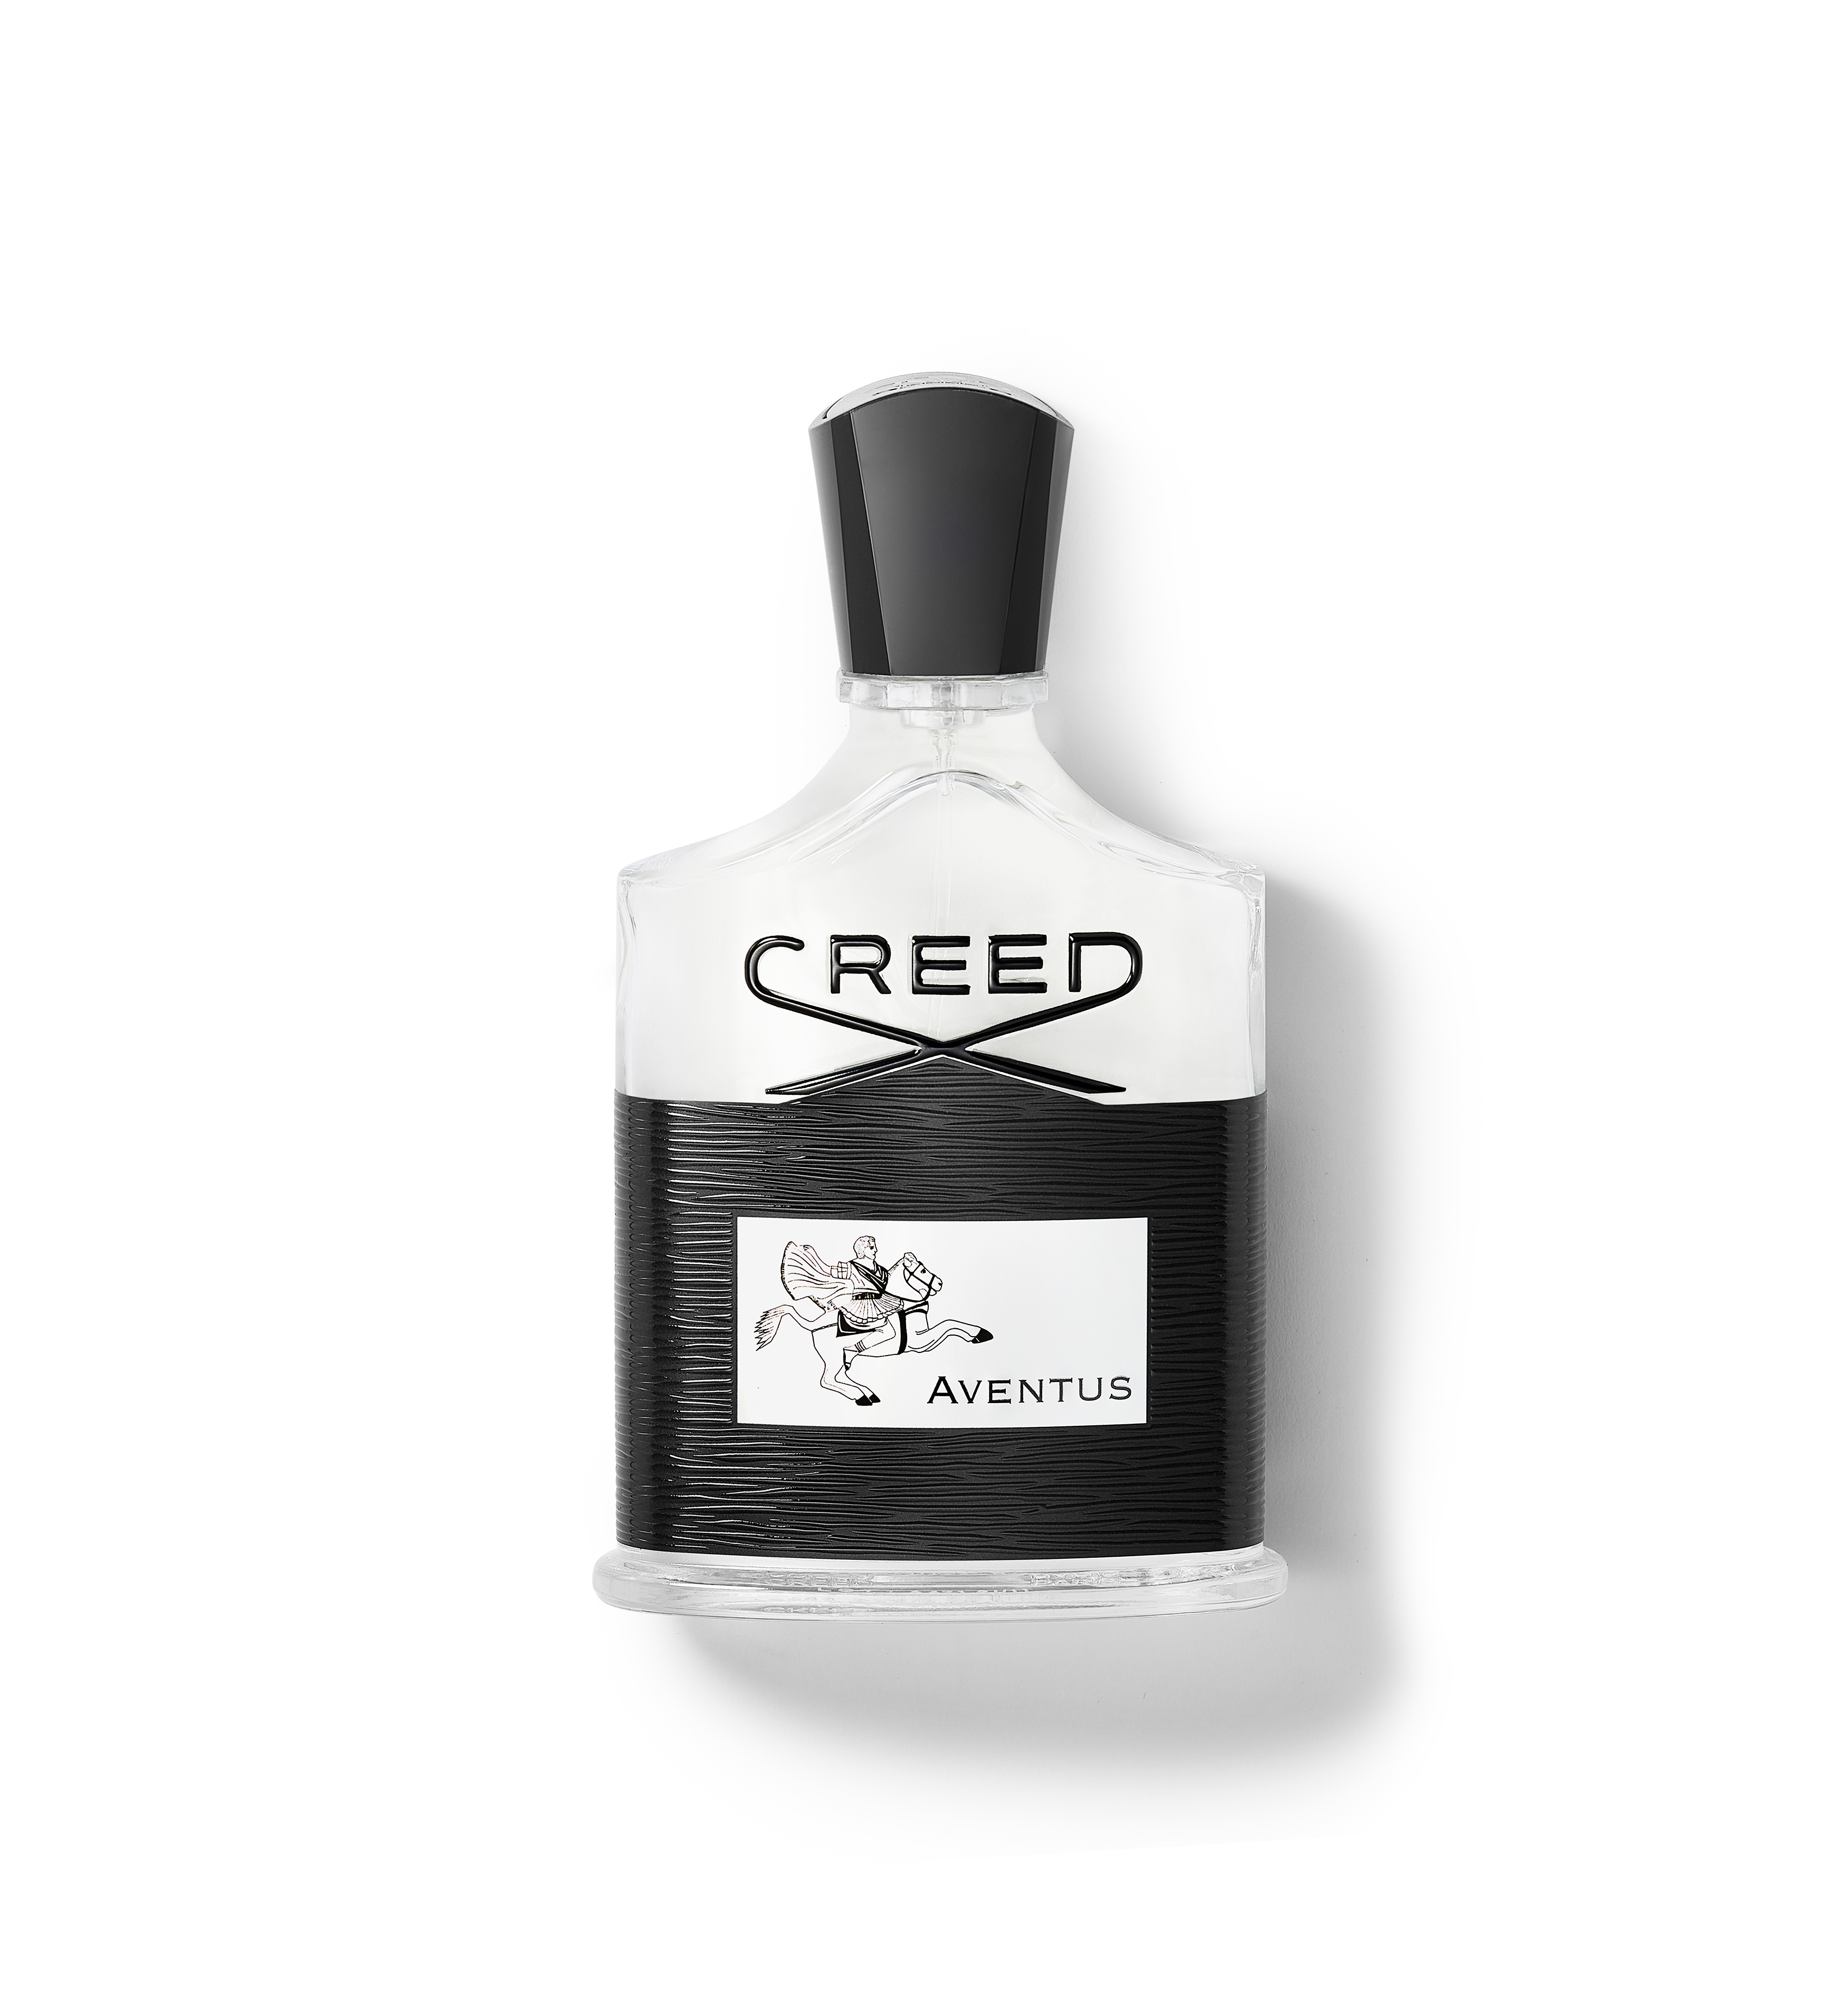 Purchase Aventus Creed and receive sample size to try